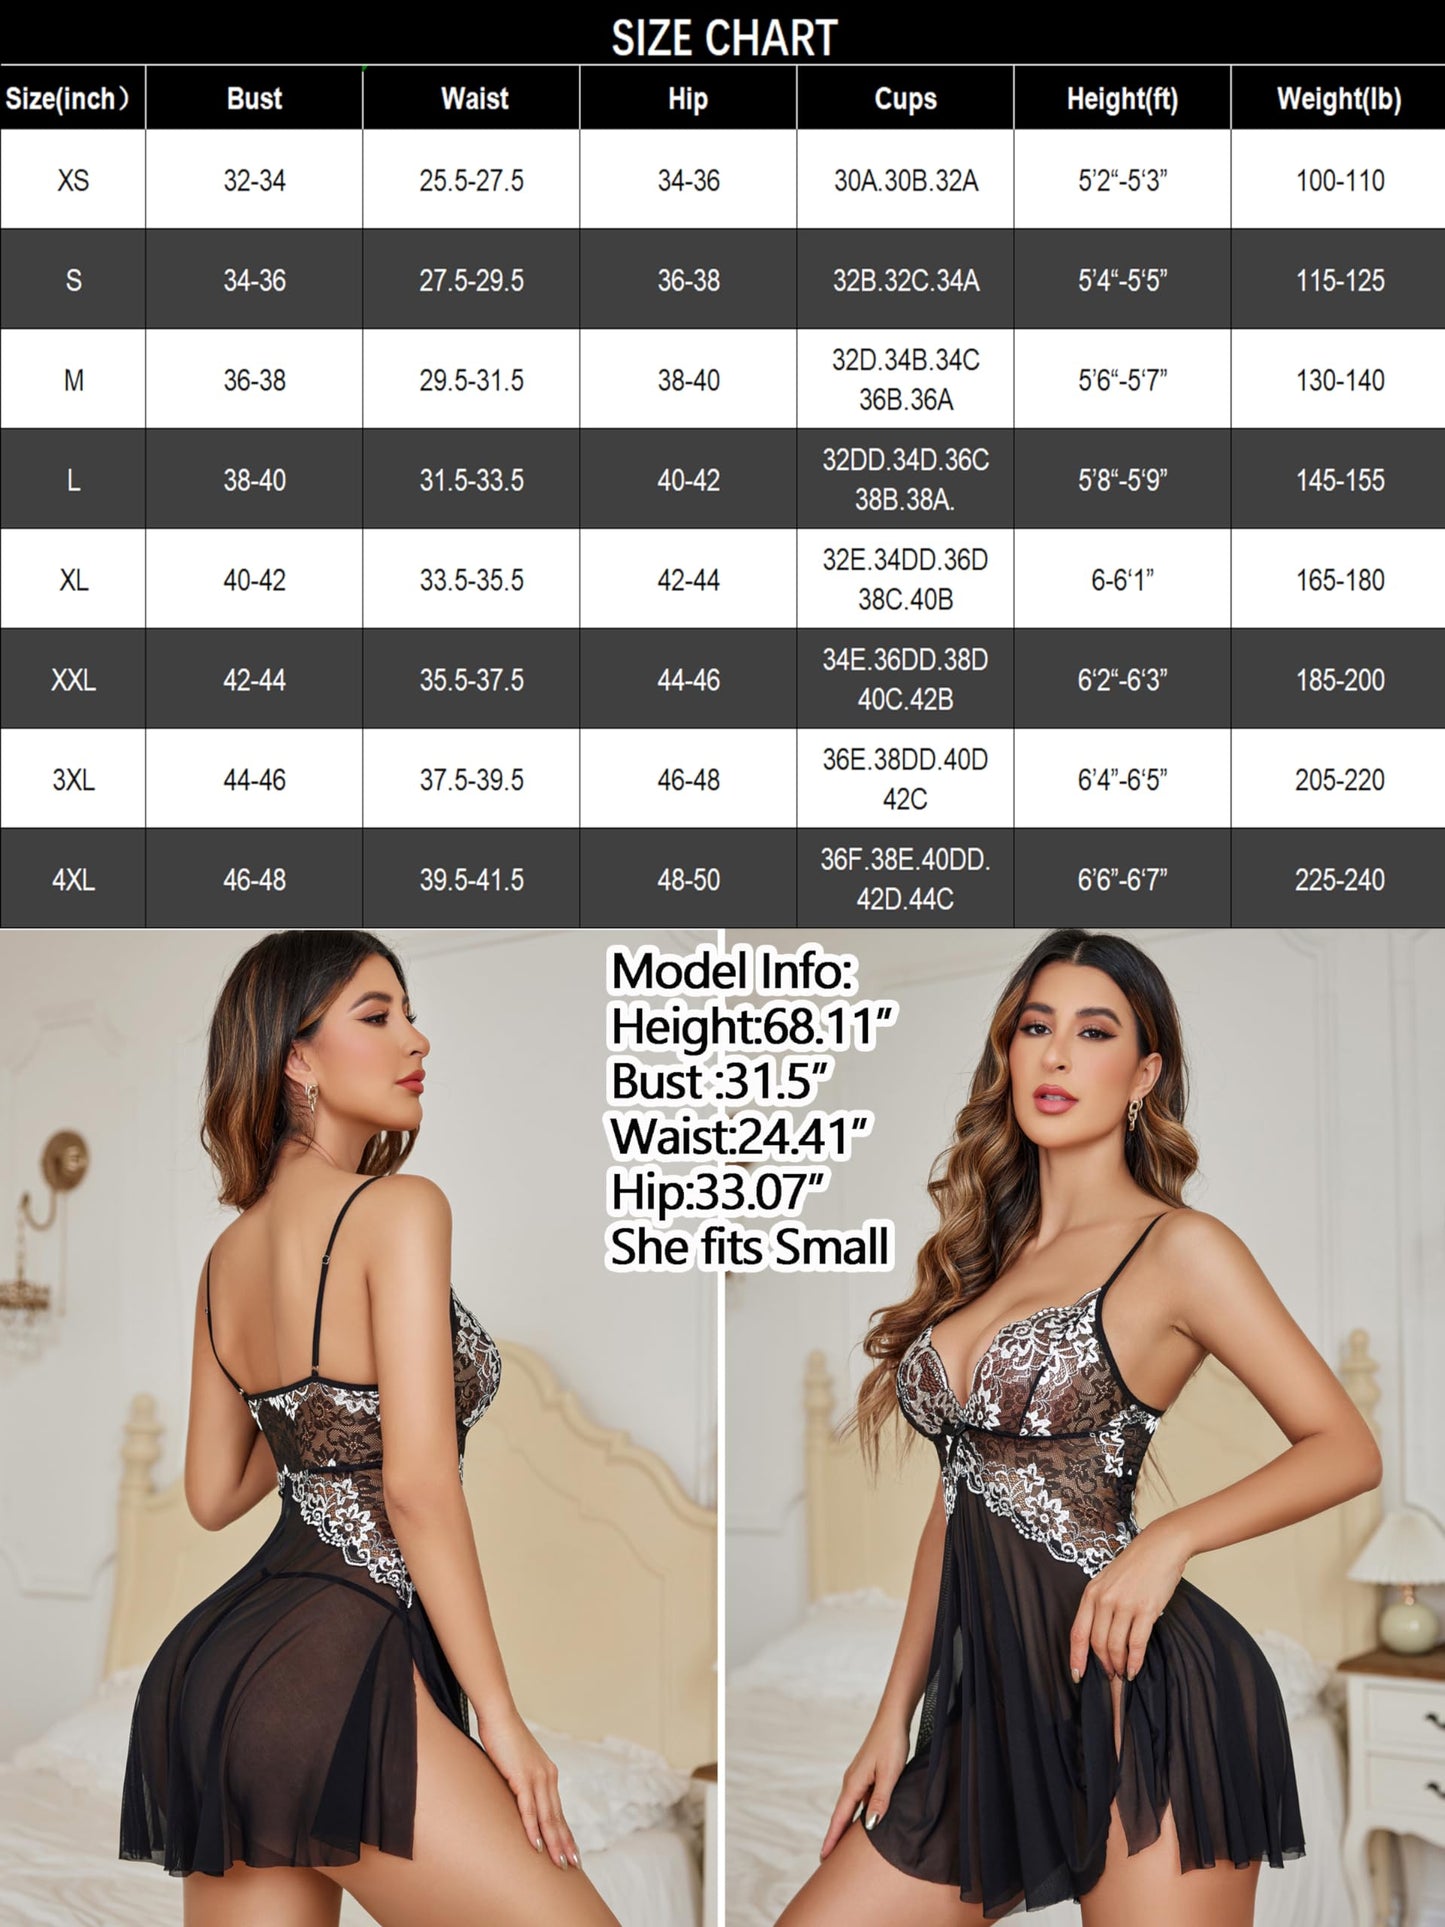 Avidlove Women Lace Lingerie Babydoll Sexy Chemise Exotic Nightgowns Bridal Nightdress